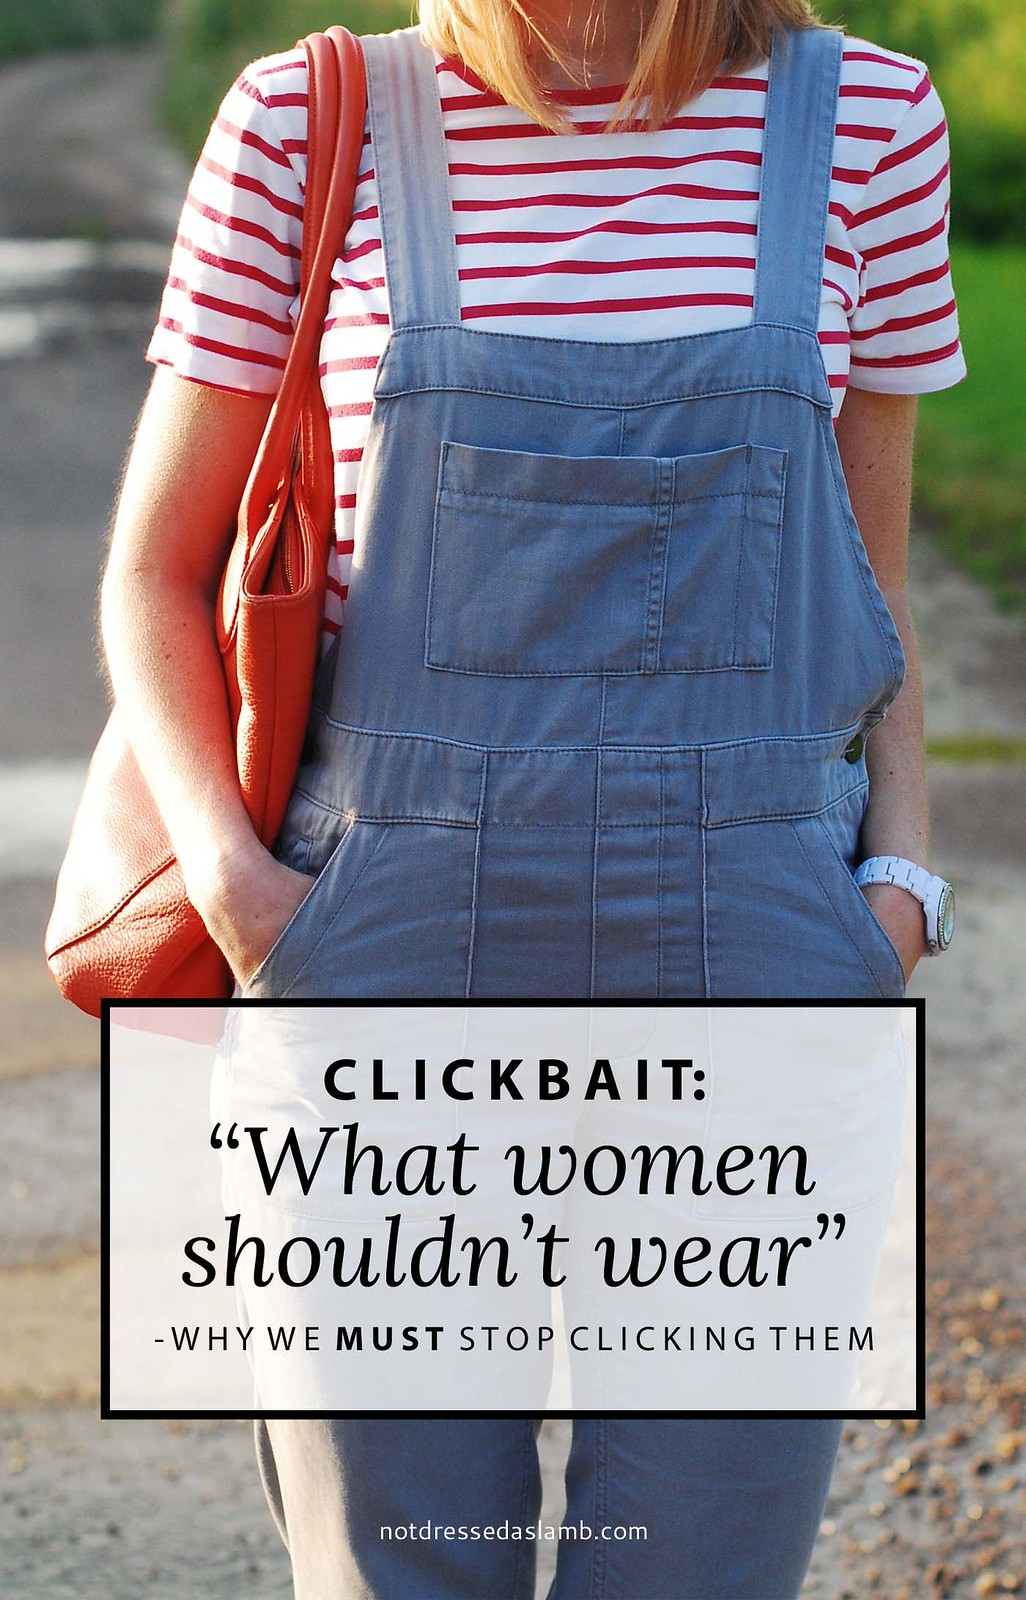 Clickbait: "What Women Shouldn't Wear" & Why We MUST Stop Clicking These Links